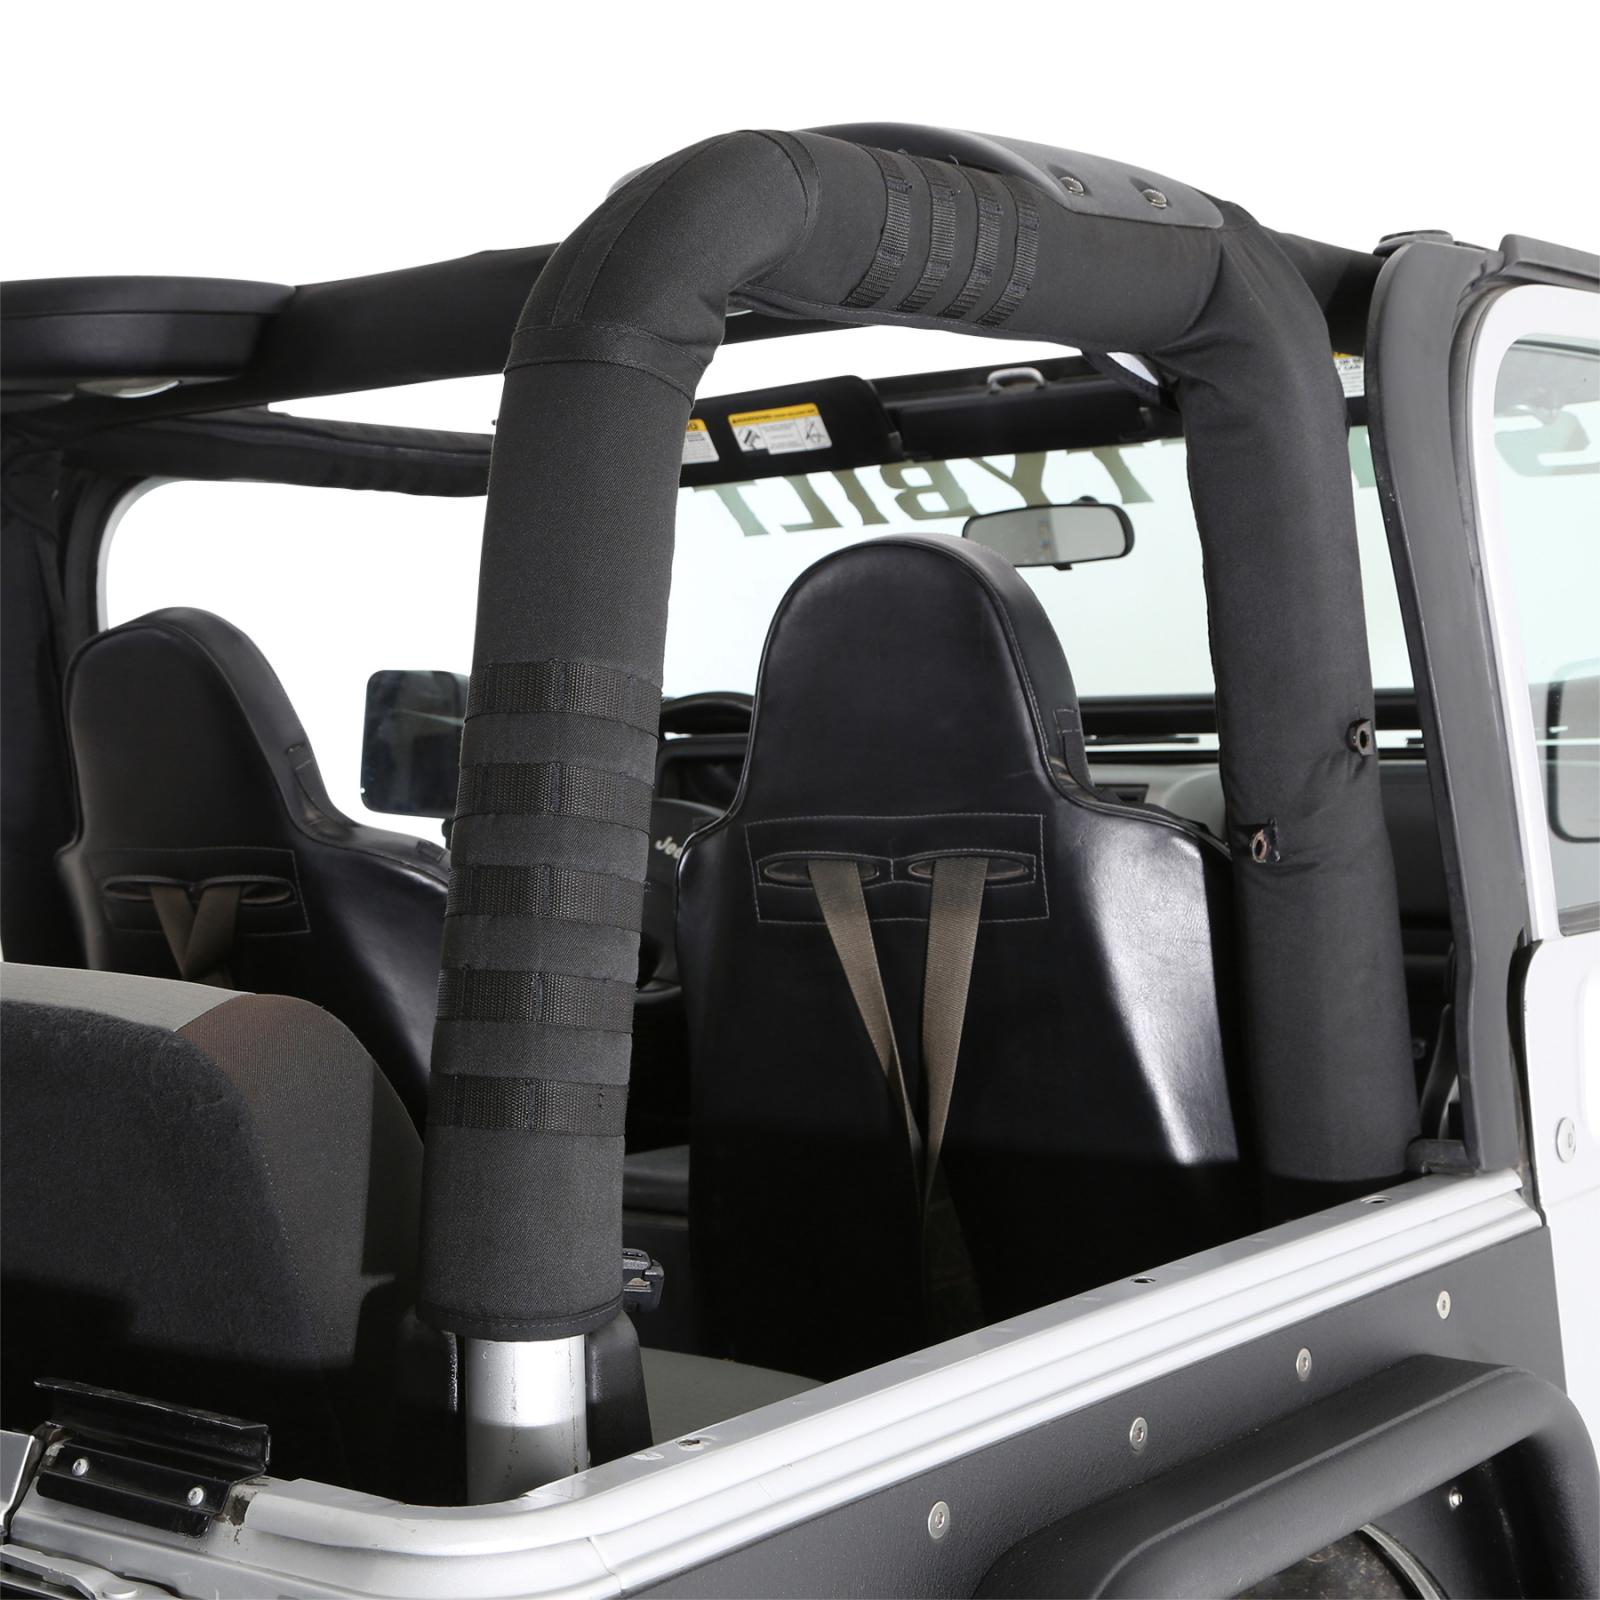 Replacement MOLLE Roll Bar Padding Cover Kit 97-06 Wrangler TJ Smittybilt |  Toys For Trucks® Official Site | Truck & Jeep Accessories